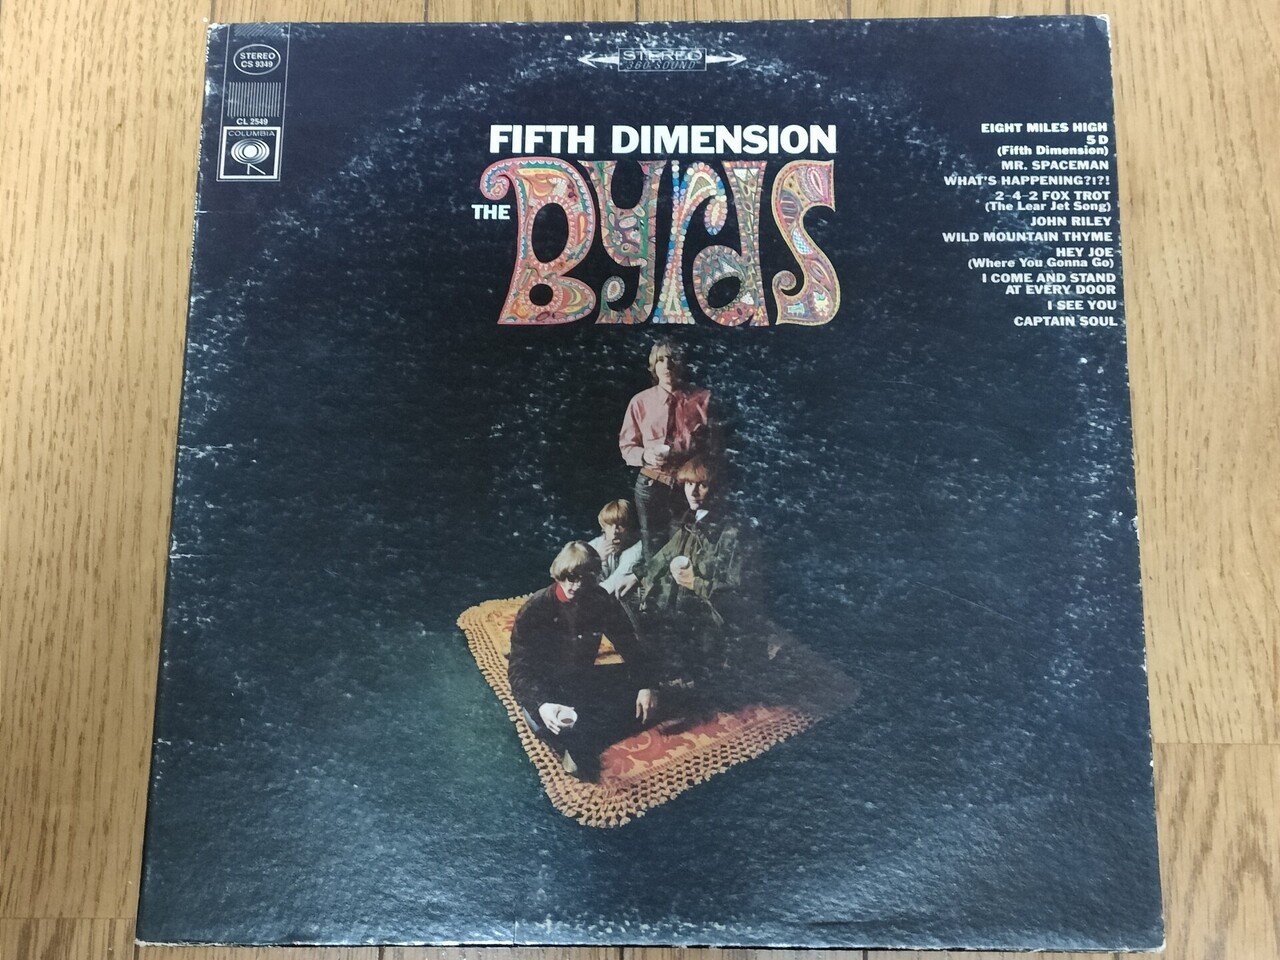 Fifth Dimension(霧の5次元)】(1966) The Byrds フォークロックから